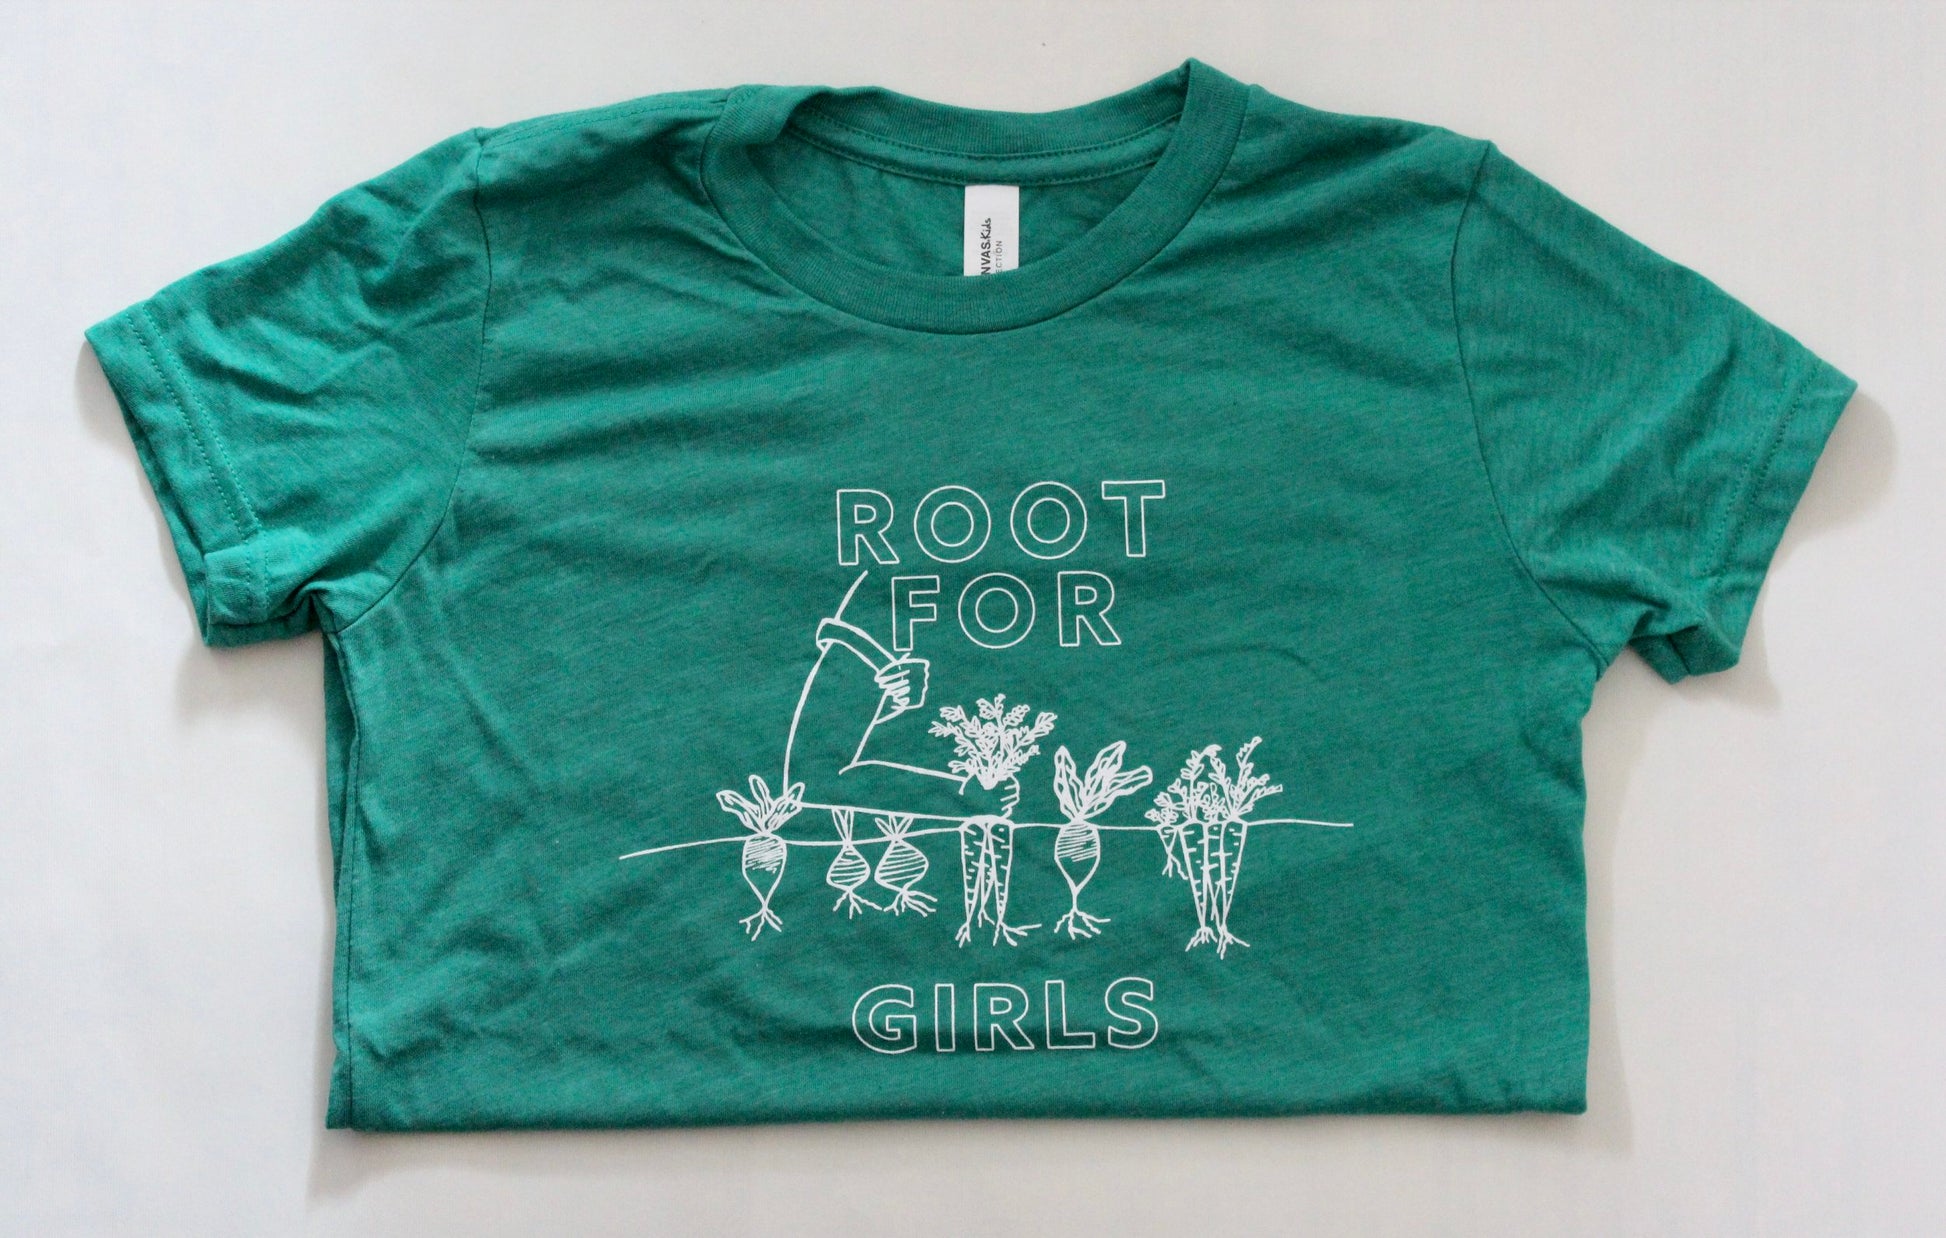 A kelly green toddler tee reads "Root for Girls" in white block letters with a garden illustration 